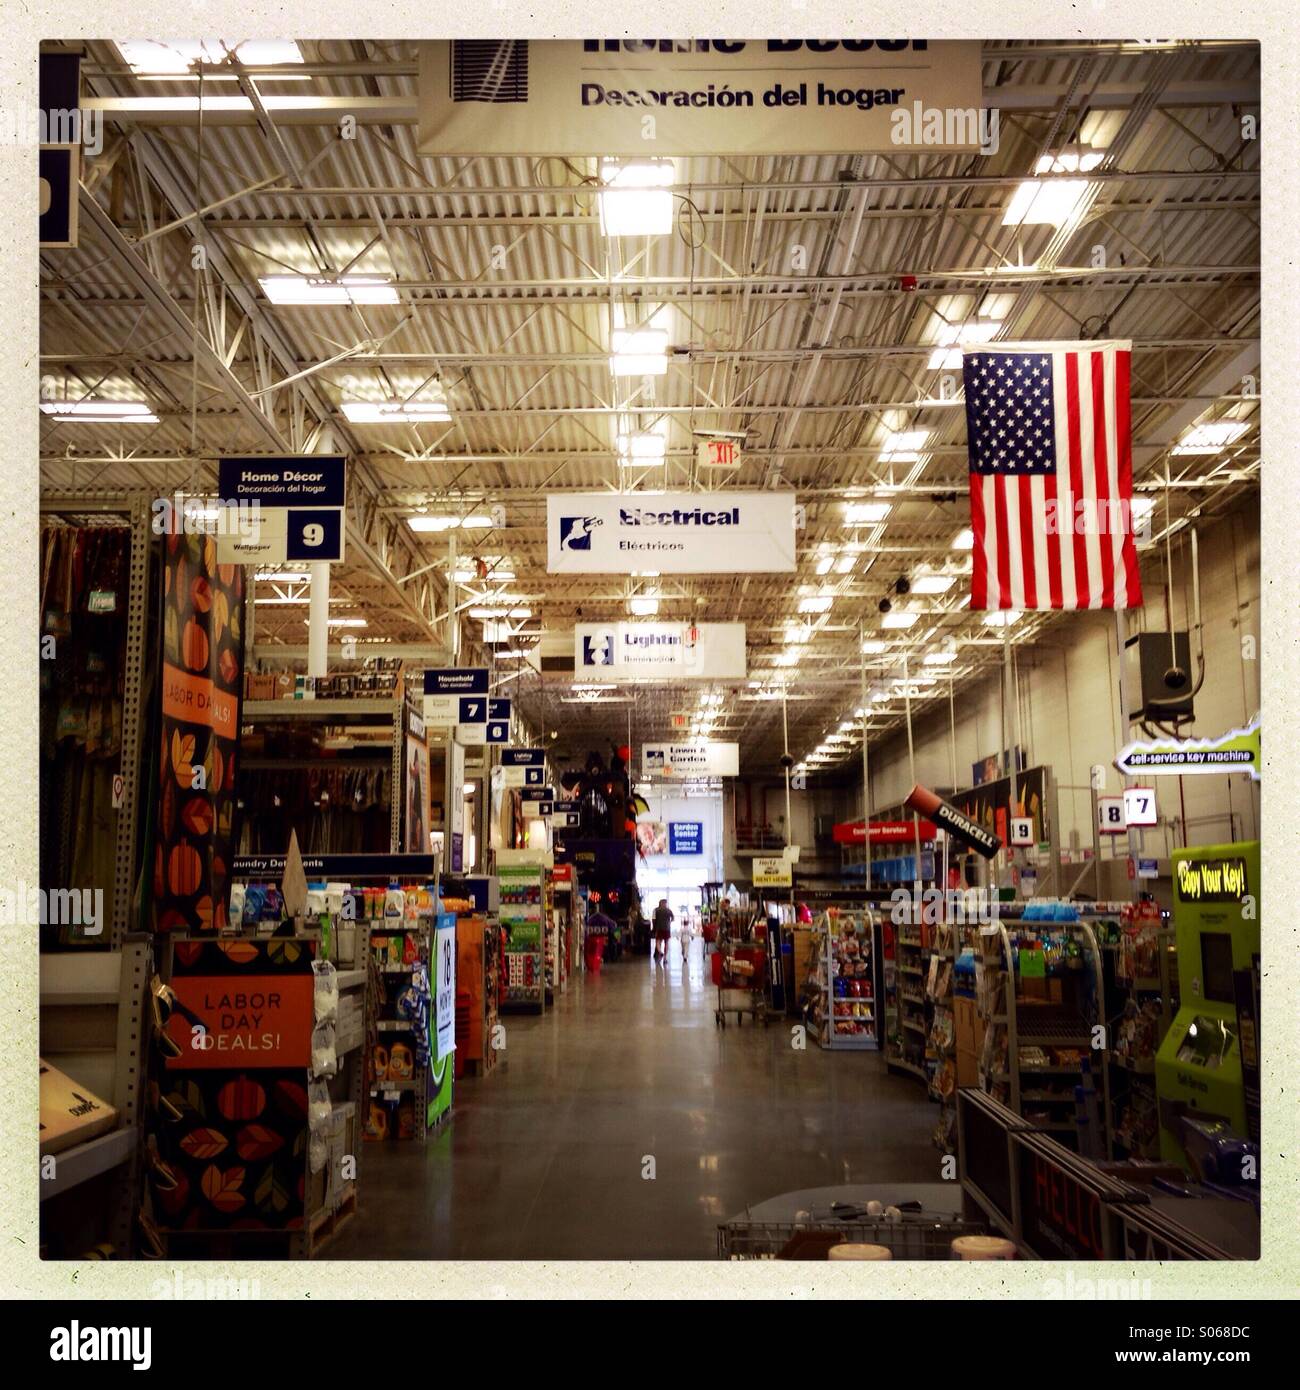 Lowes home improvement store Stock Photo